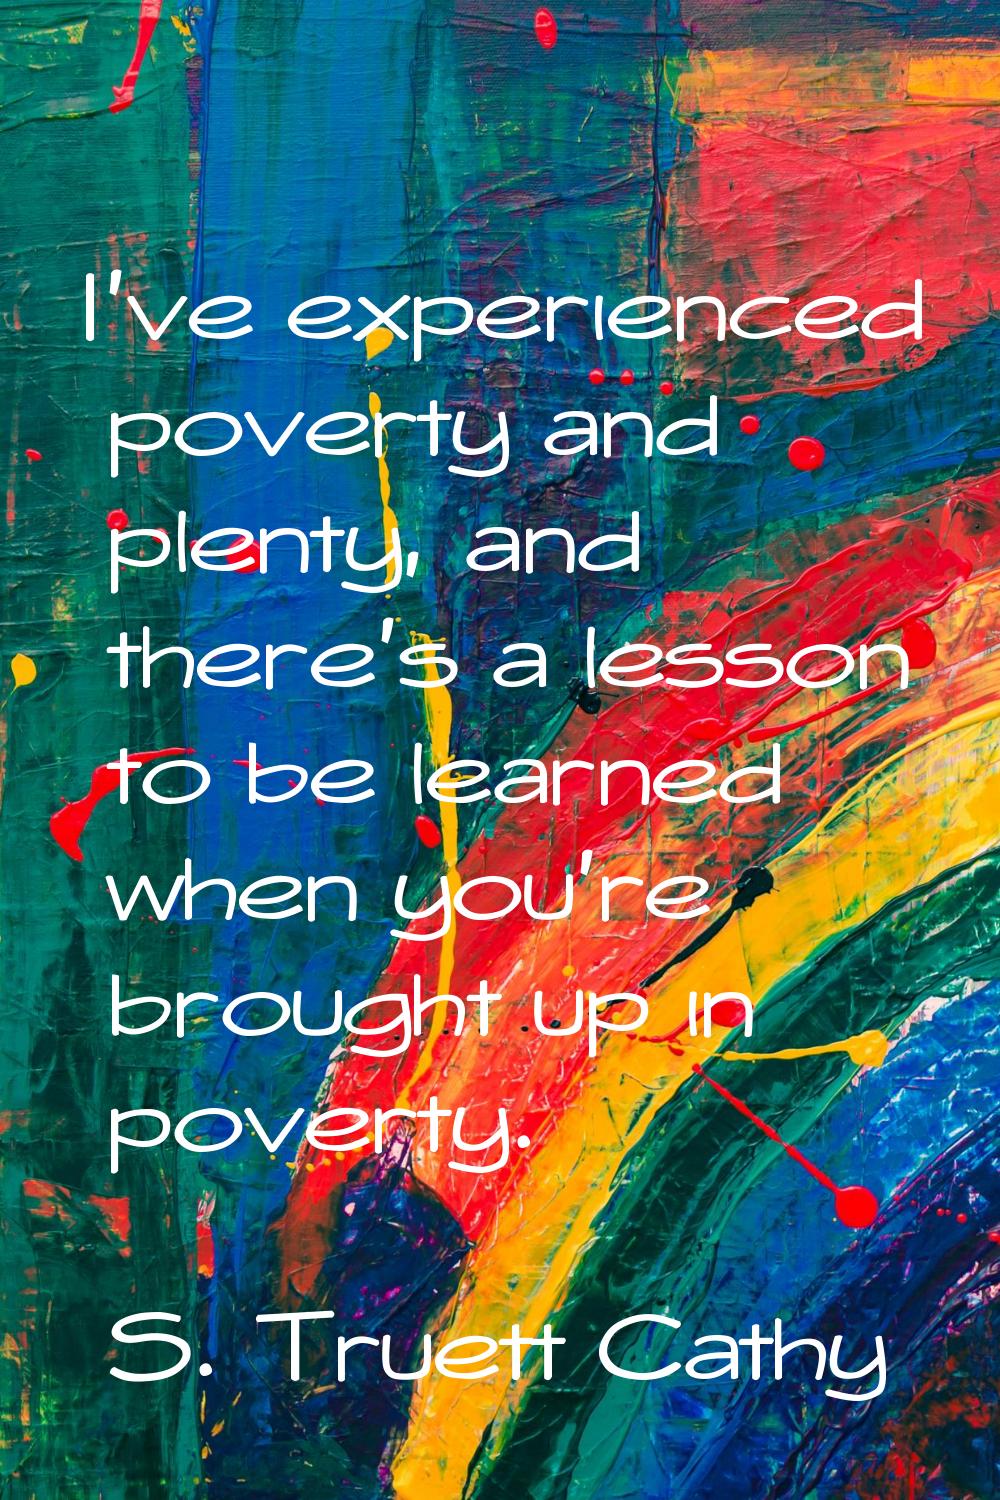 I've experienced poverty and plenty, and there's a lesson to be learned when you're brought up in p